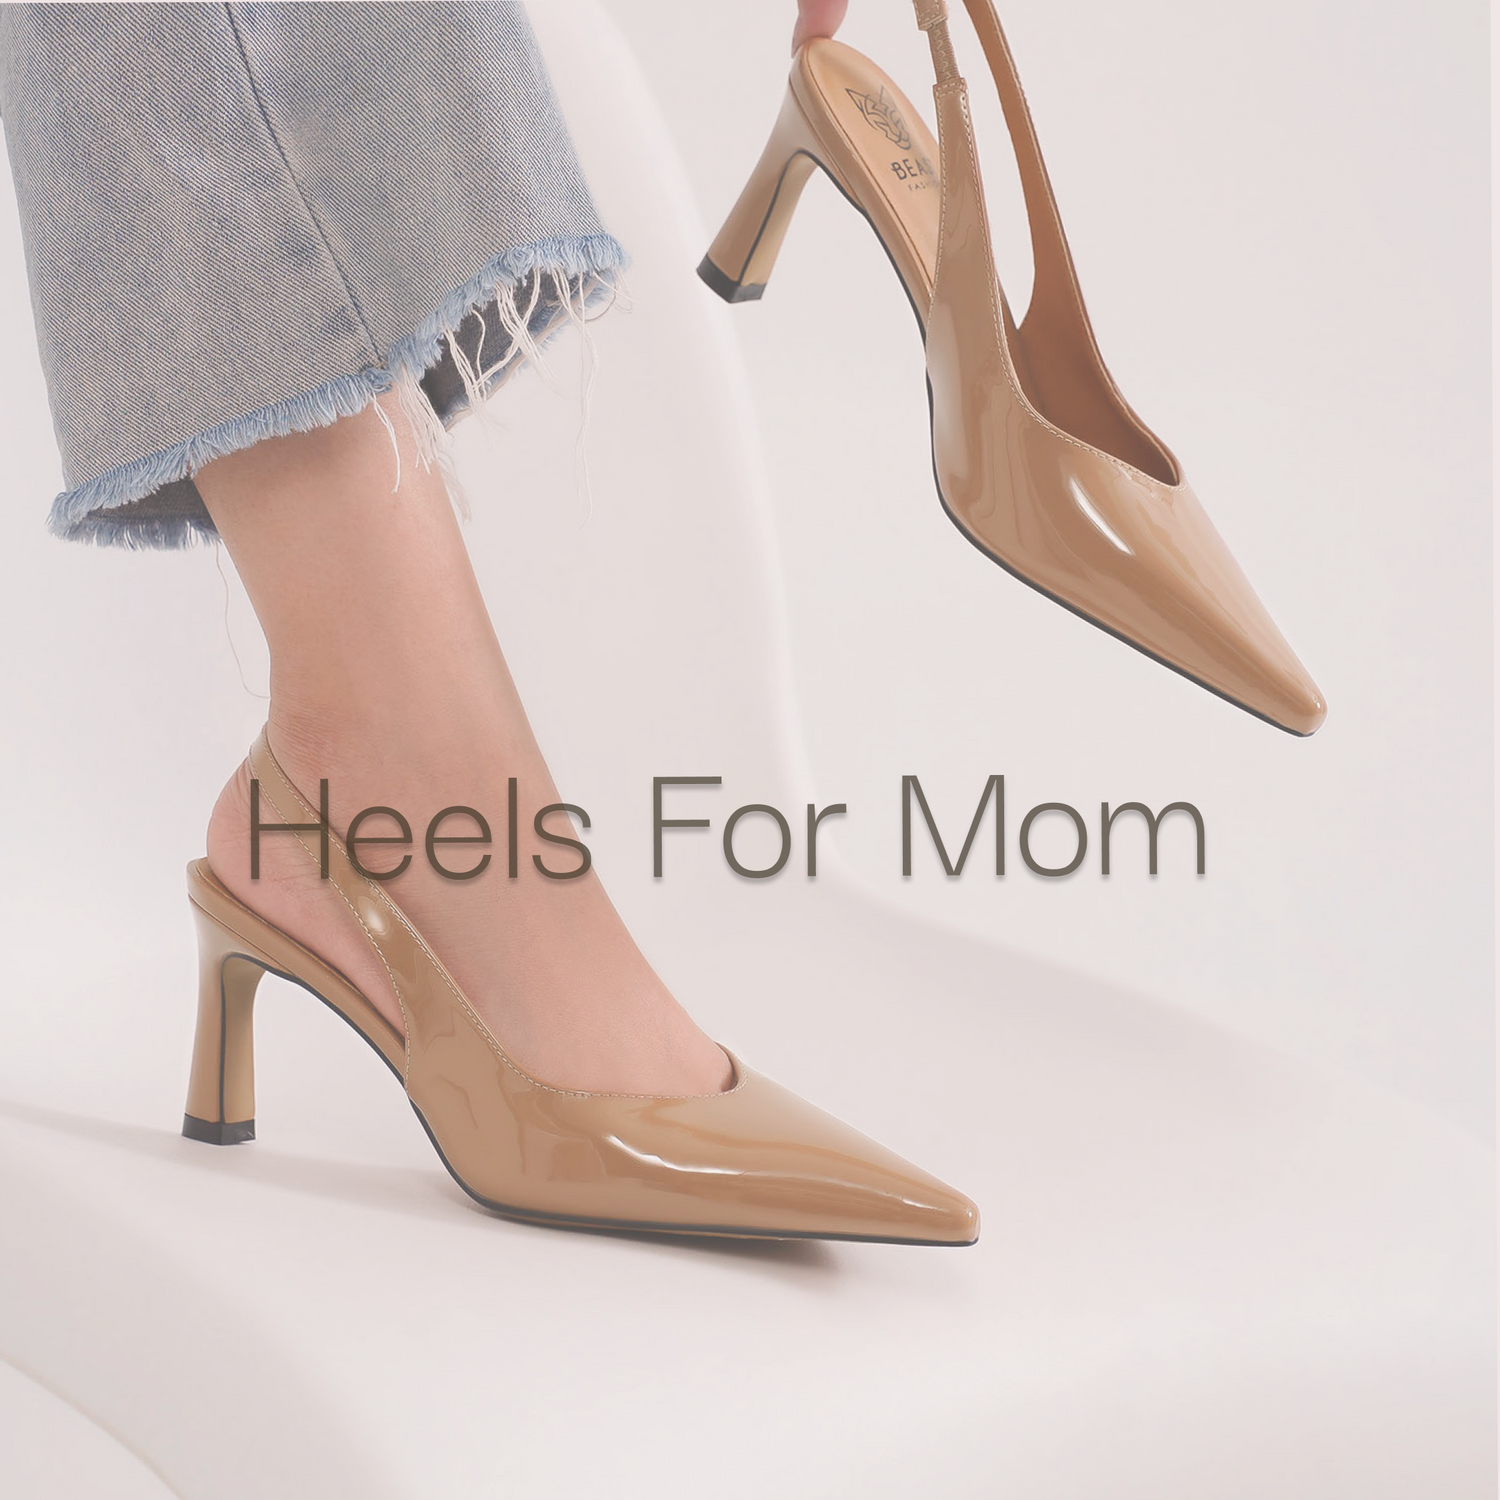 Heels For Mom